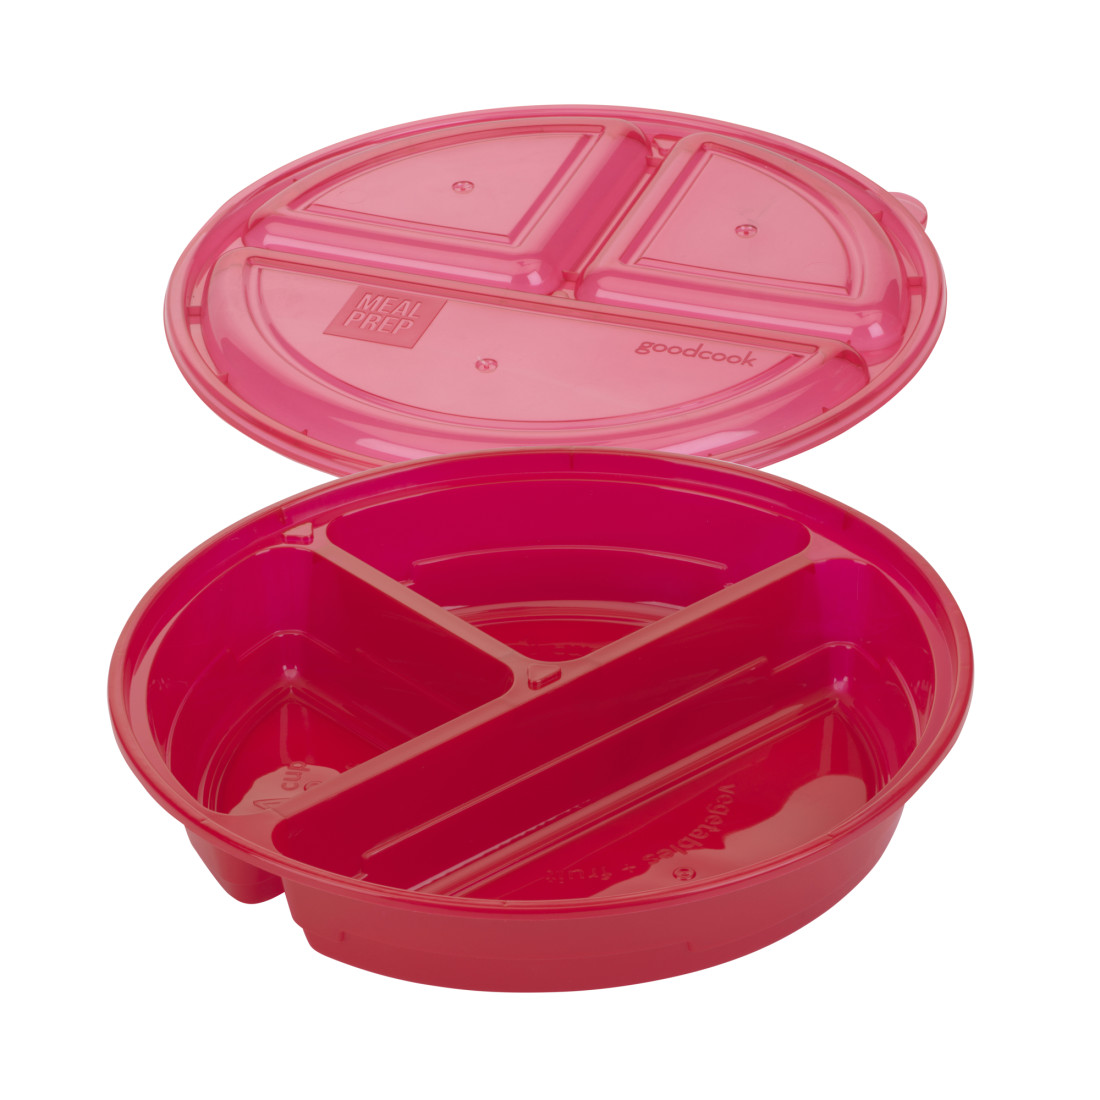 I love it when Tupperware drops my favorite meal prep containers as a